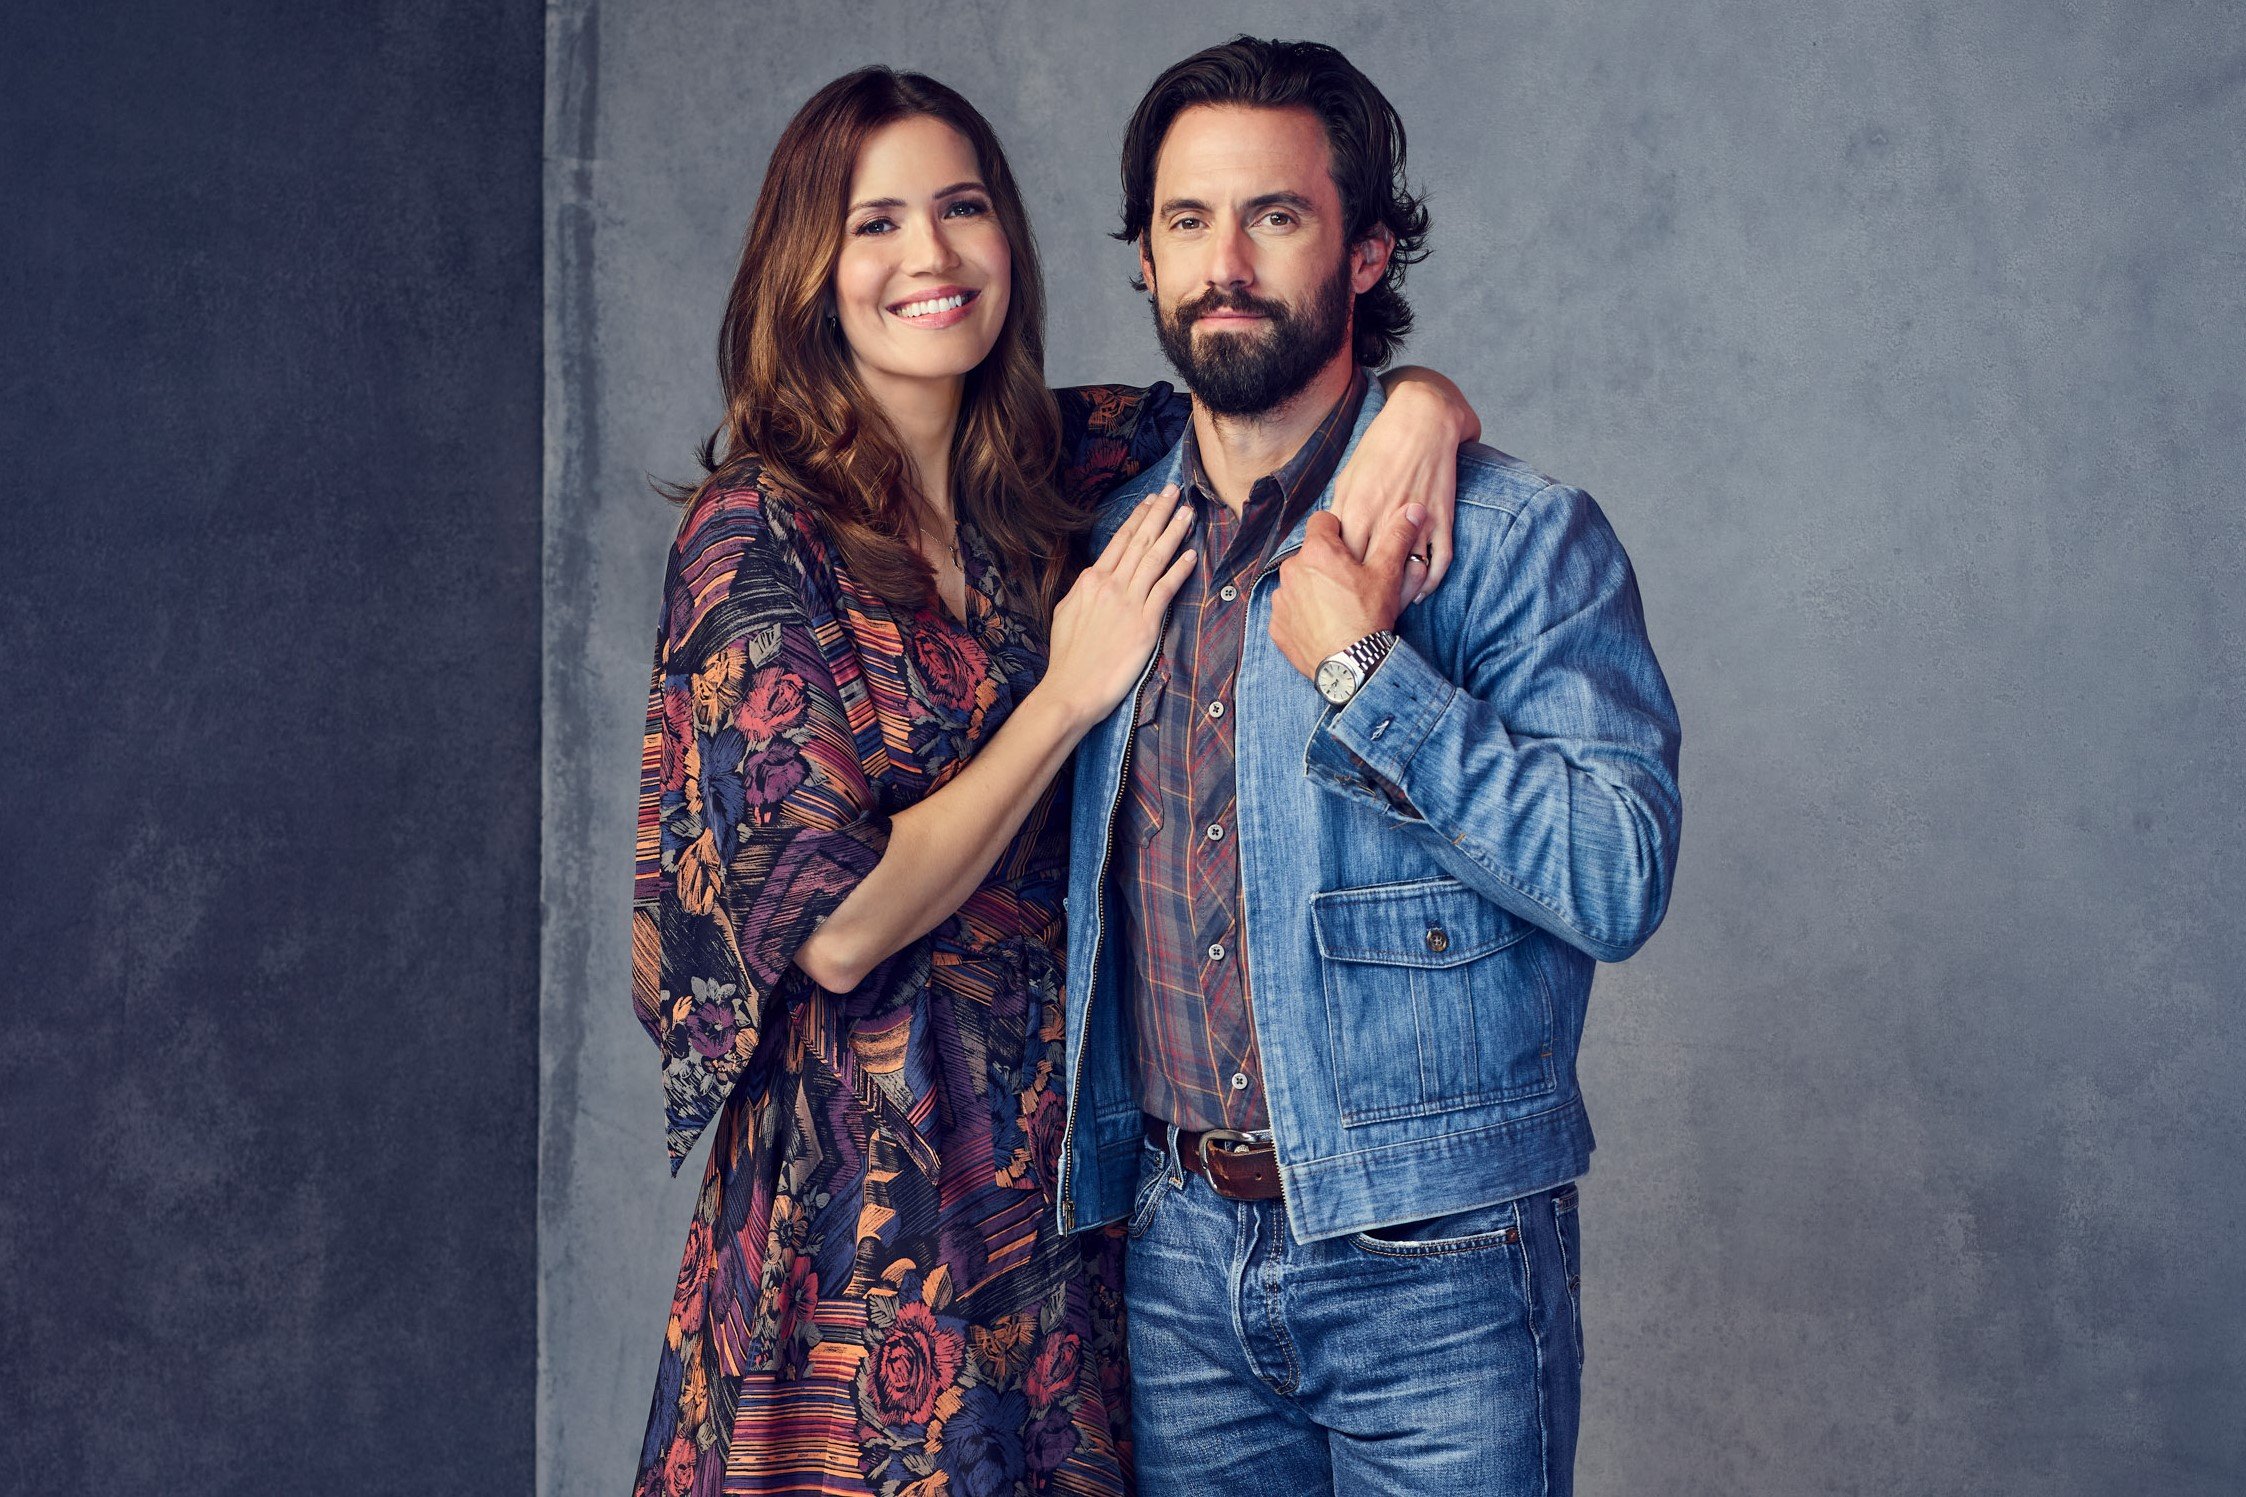 'This Is Us' Season 6 actors Mandy Moore and Milo Ventimiglia, in character as Rebecca and Jack Pearson, pose for promotional pictures. Moore wears a multi-colored floral patterned dress. Ventimiglia wears a jean jacket over a red, blue, and yellow plaid button-up shirt and jeans.